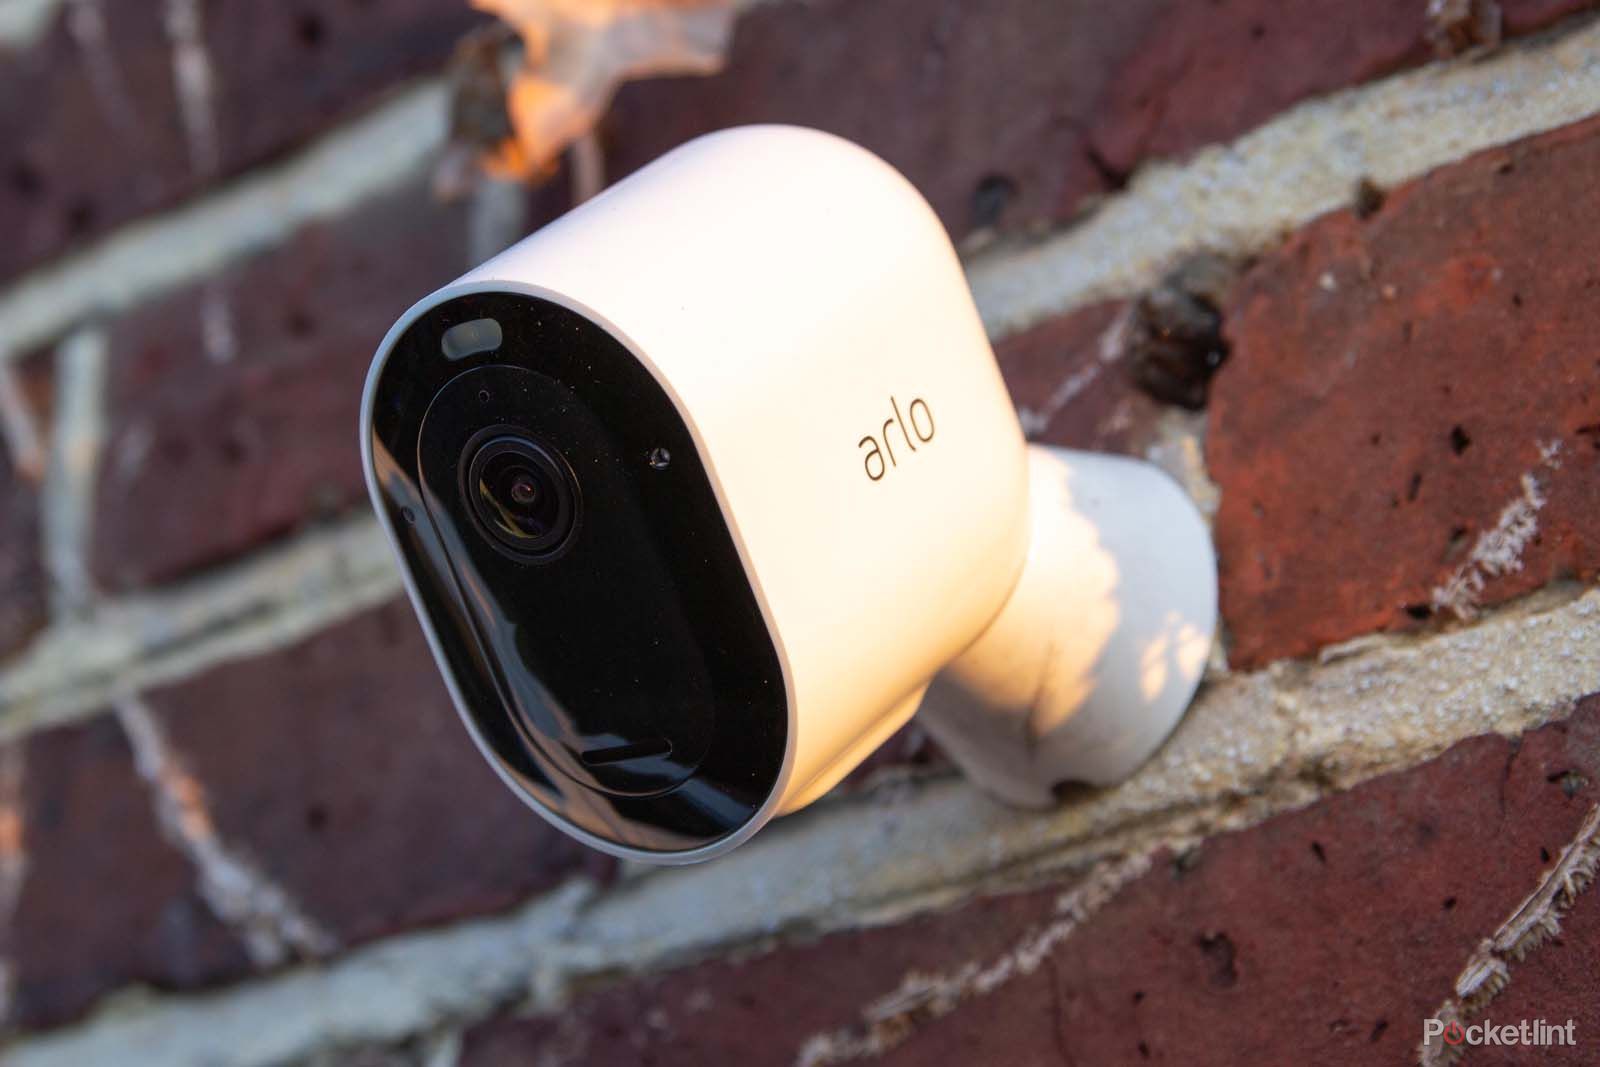 Arlo joins Ring in insisting on two-factor authentication for its smart home tech image 1